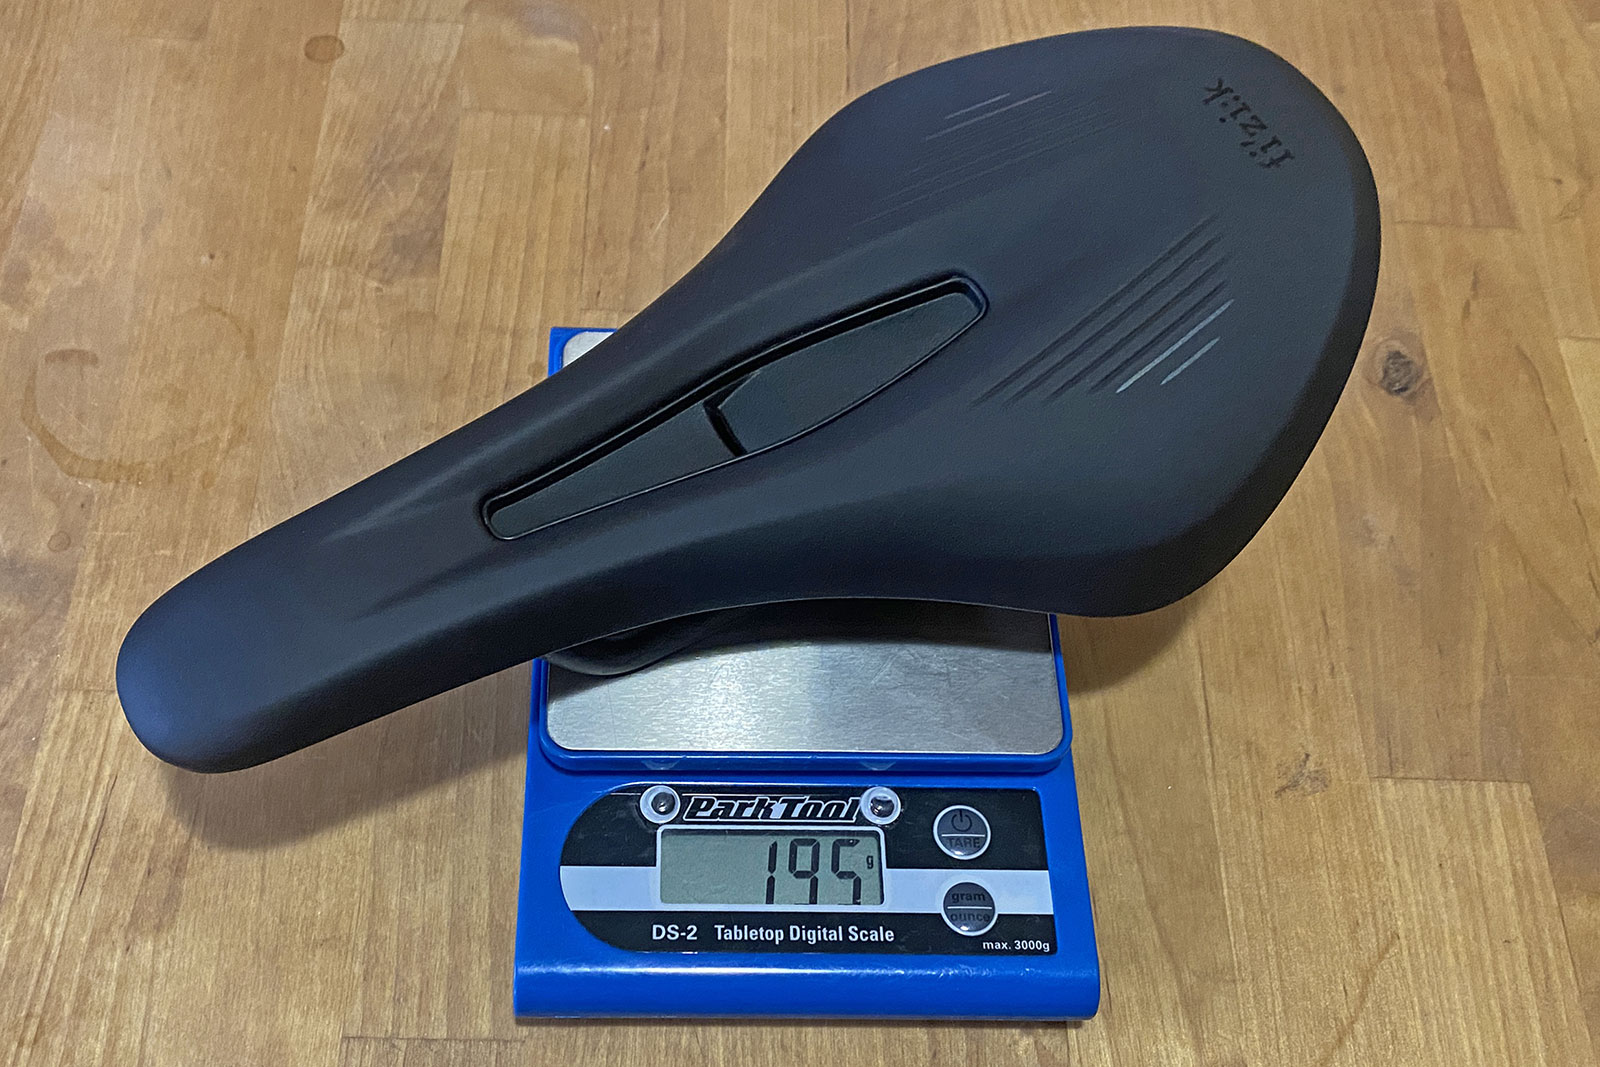 Fizik Vento Argo X1 off-road gravel racing saddle Review, new carbon rail version 140mm wide 195g actual weight